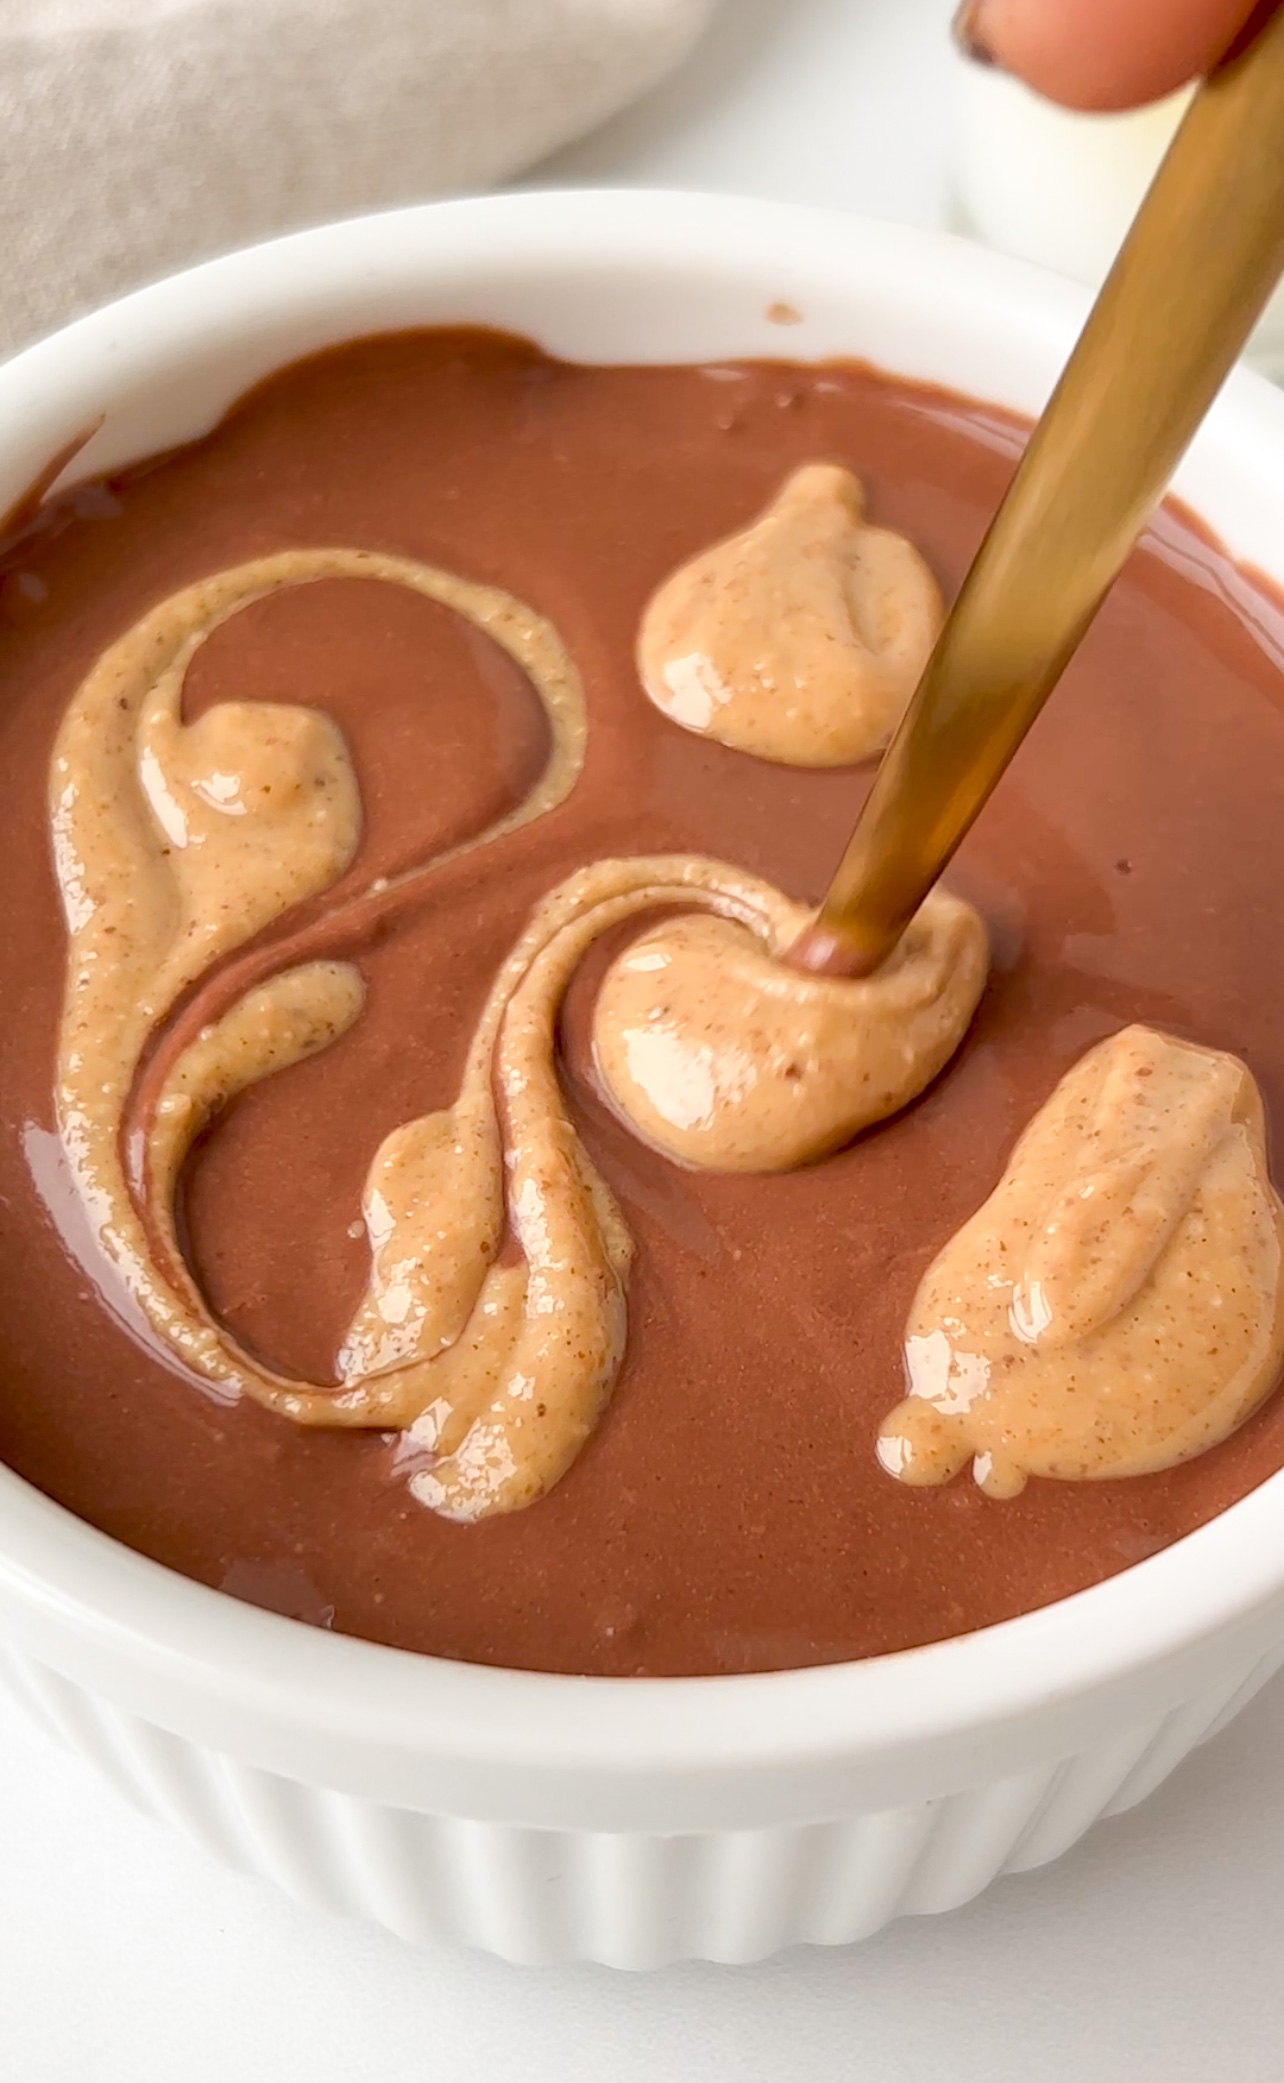 spoon swirling peanut butter on chocolate 